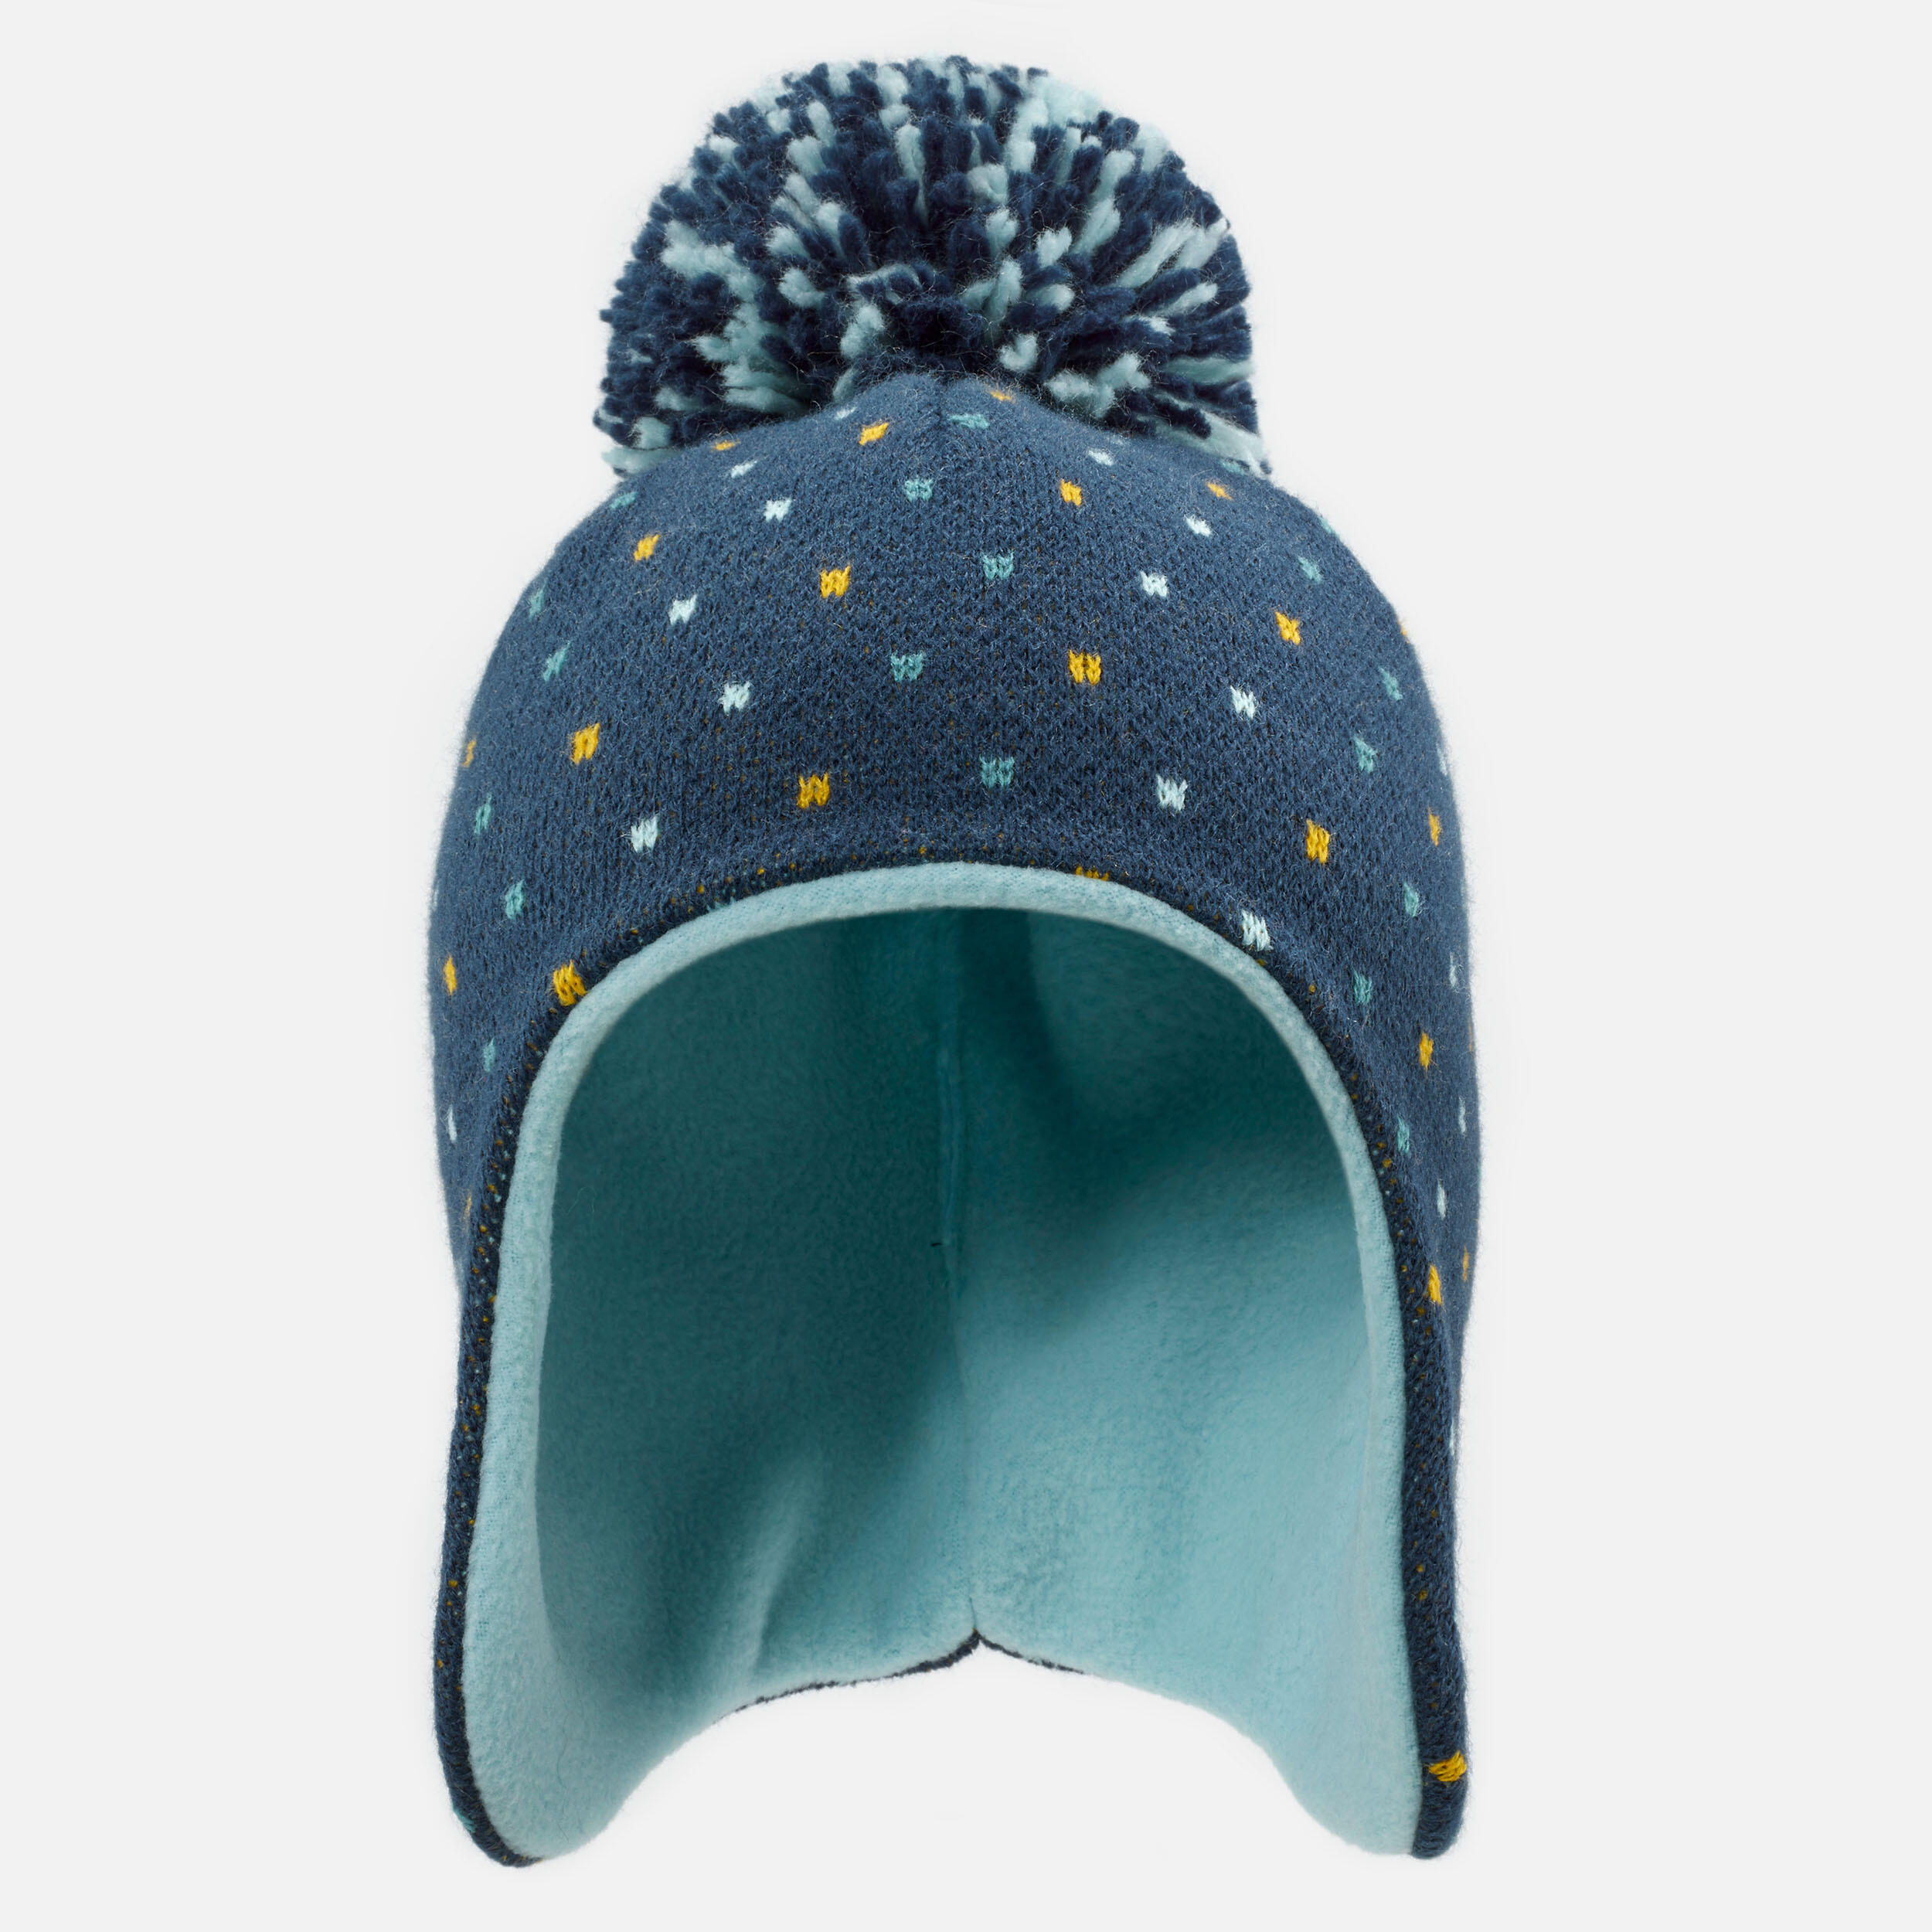 Baby Peruvian ski/sledge hat - SIMPLE WARM navy blue and turquoise 4/8